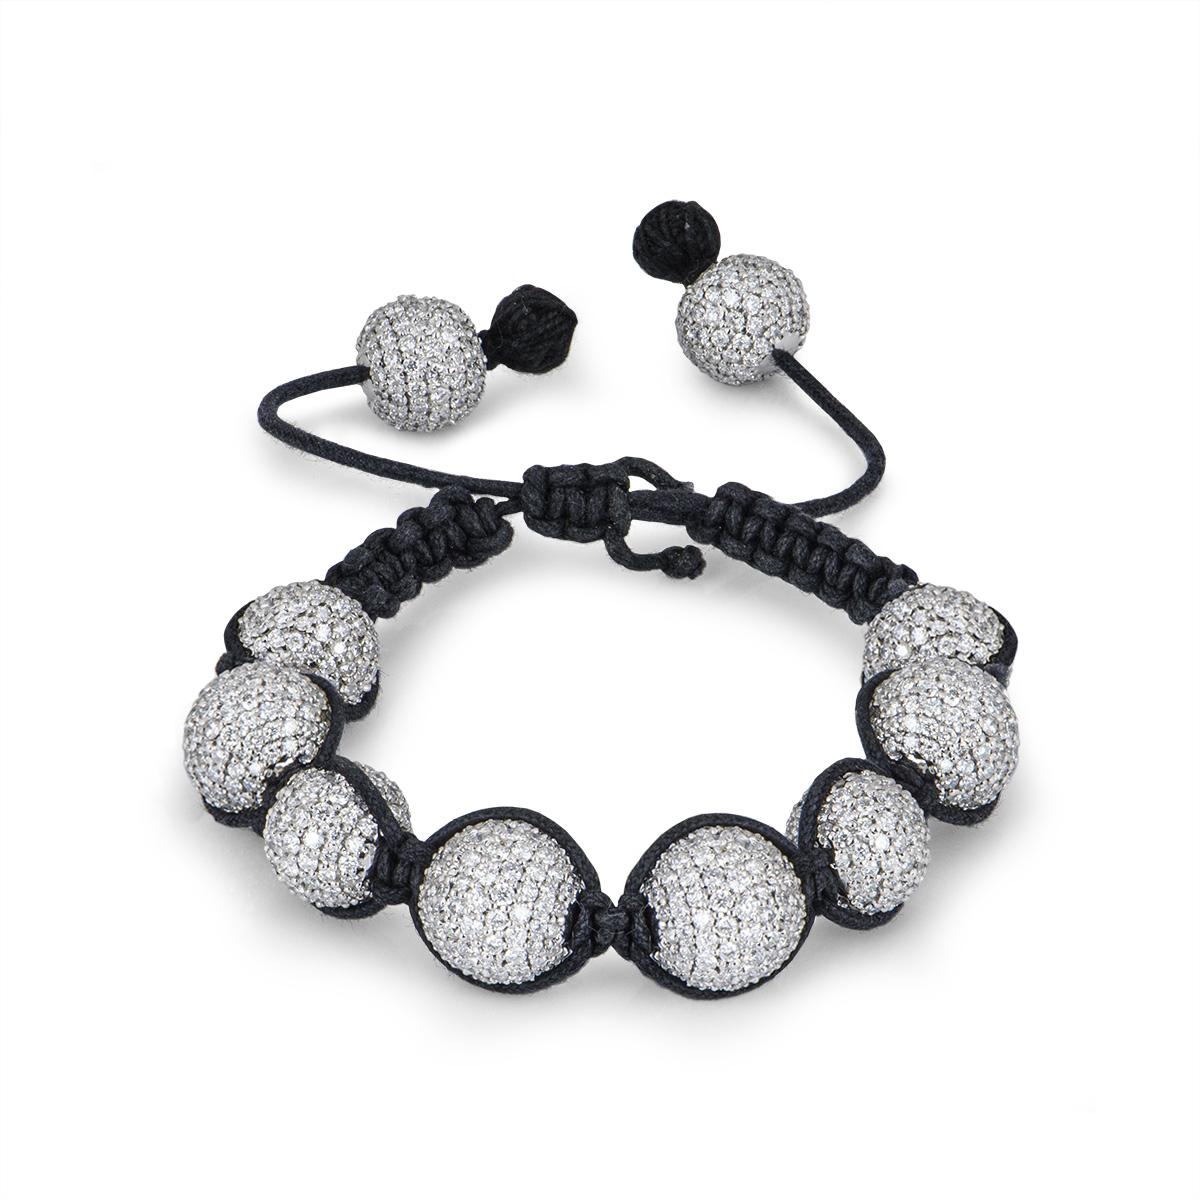 An exquisite 18k white gold pave diamond set cord bracelet. The bracelet is composed of 8 large beads interlinked by a black adjustable woven cord, completed by two smaller beads to adjust the cord for a perfect fit. Each bead is intricately set